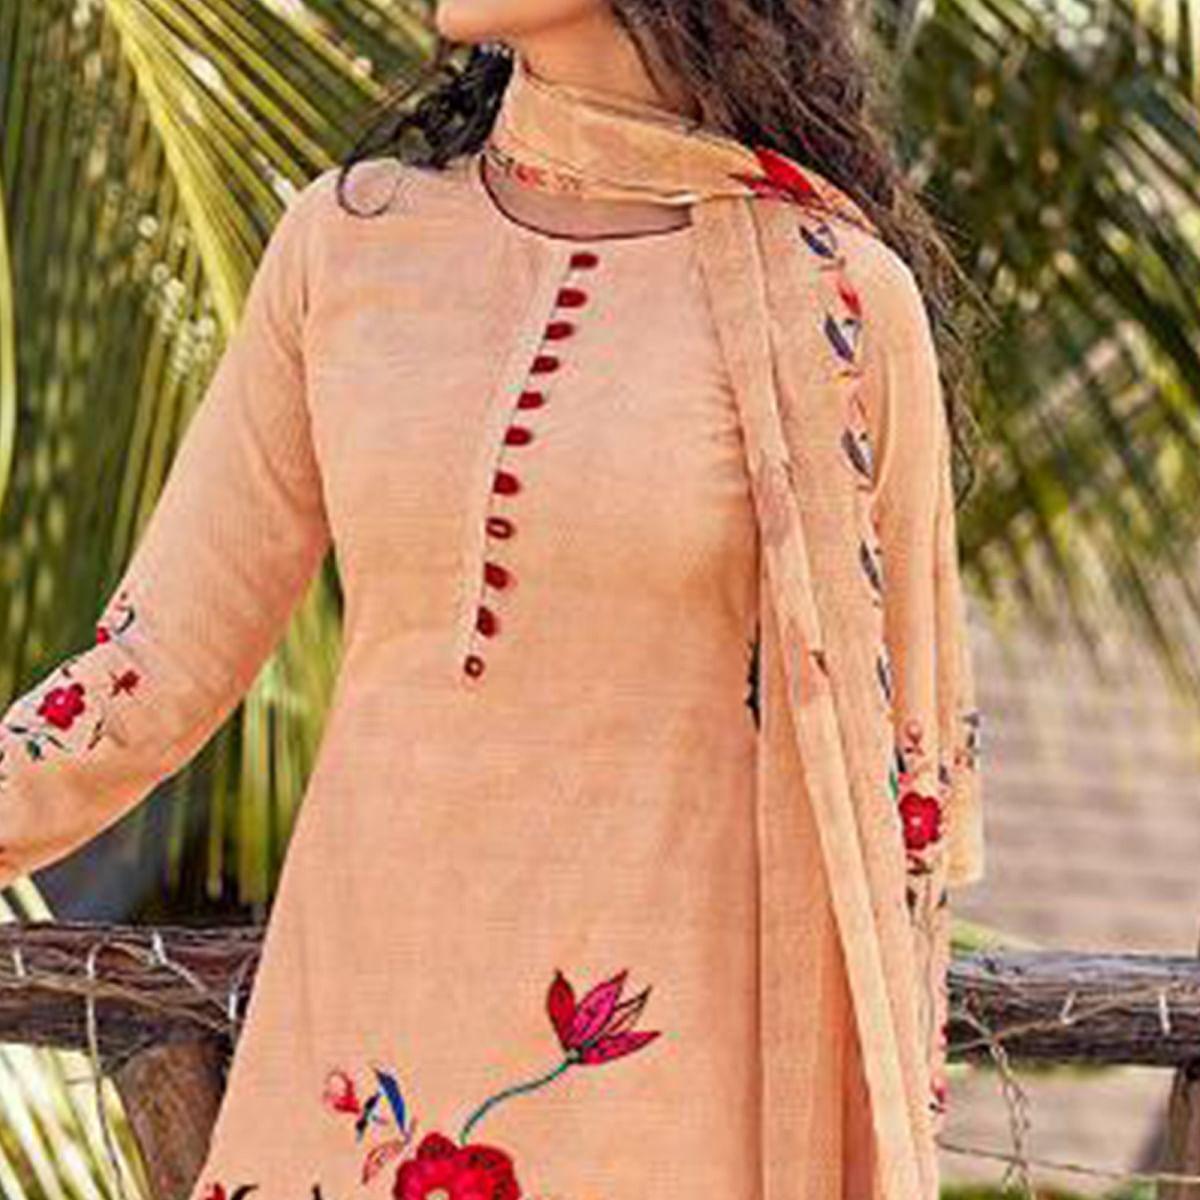 Light Orange Floral Digital Printed With Handwork Cambric Cotton Partywear Suit - Peachmode